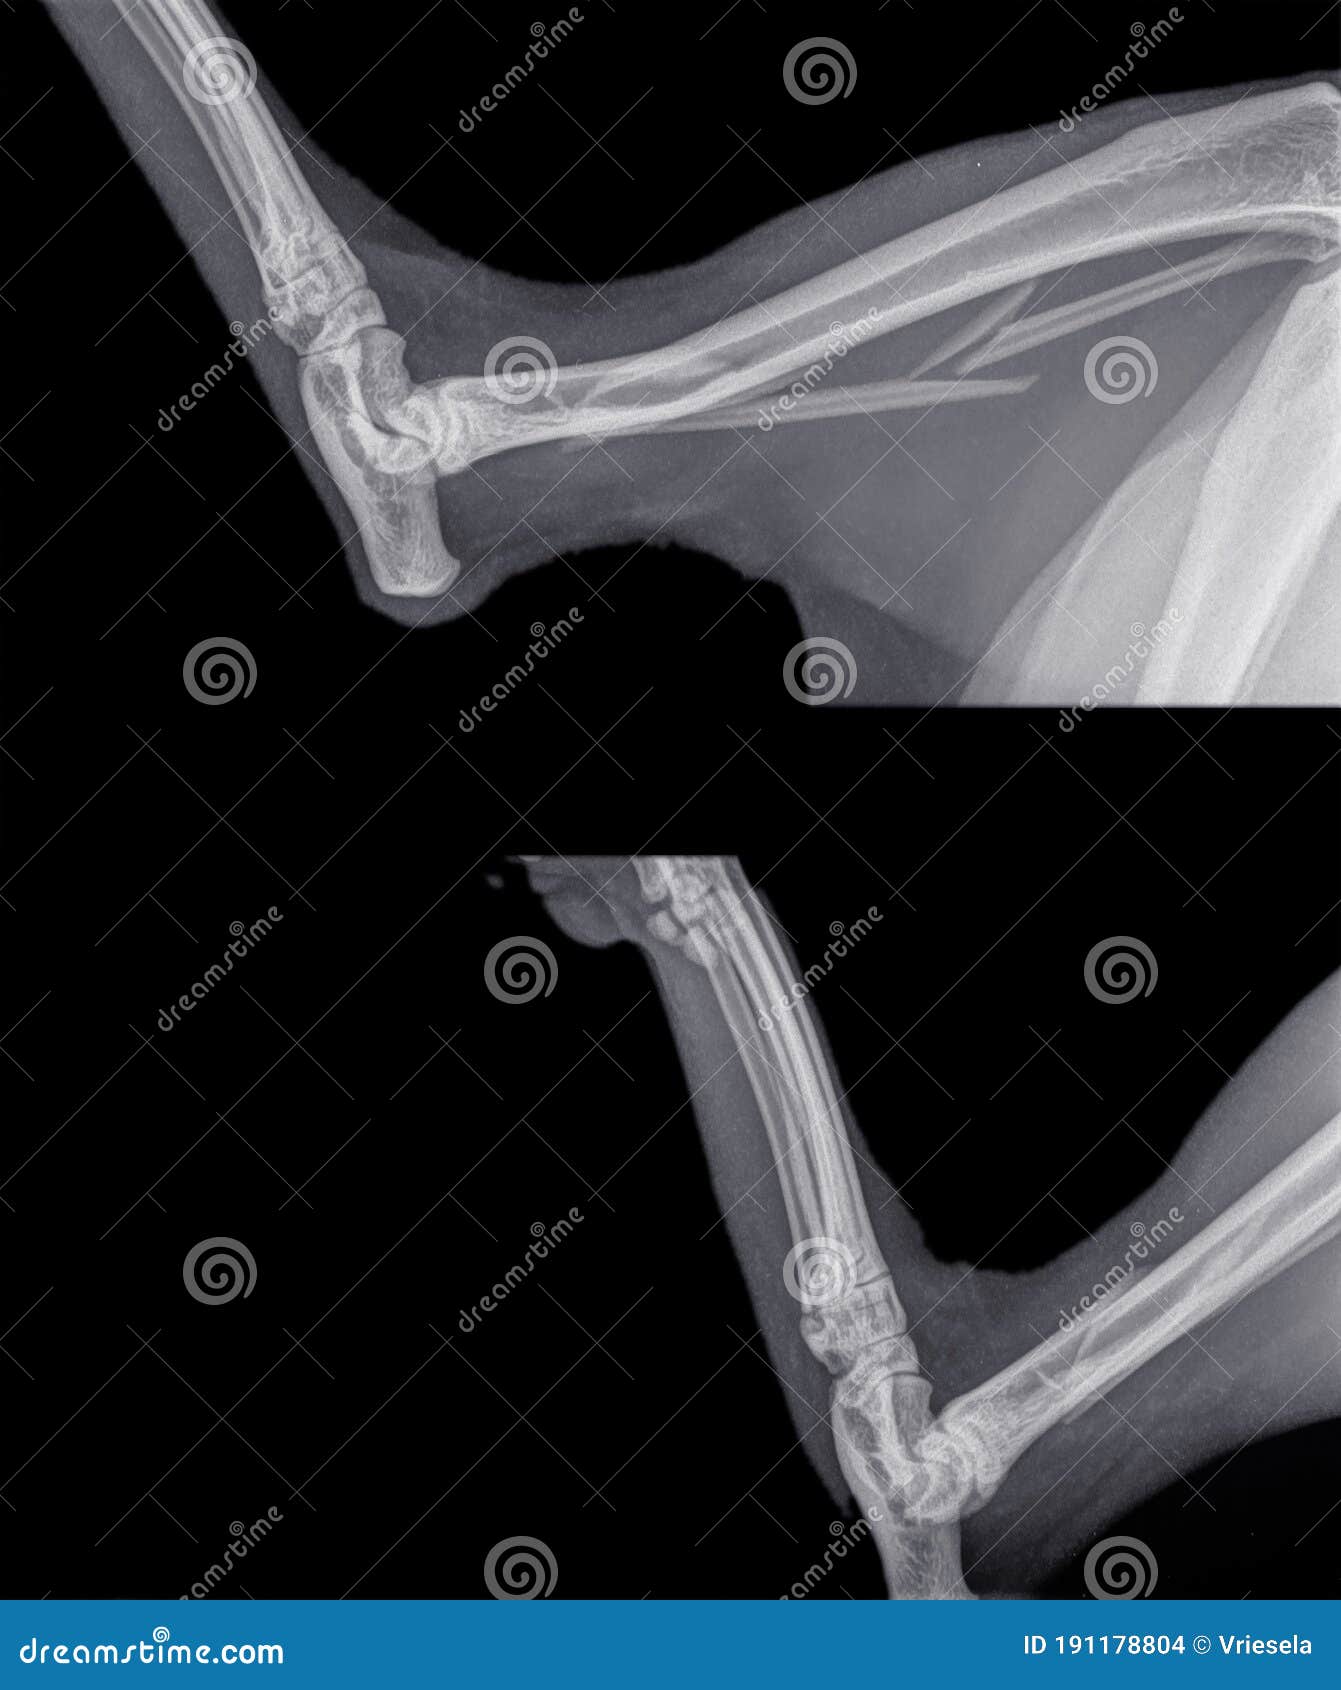 X Ray Of The Hind Leg Of A Cat With A Fracture Of The Calf Bone Fibula